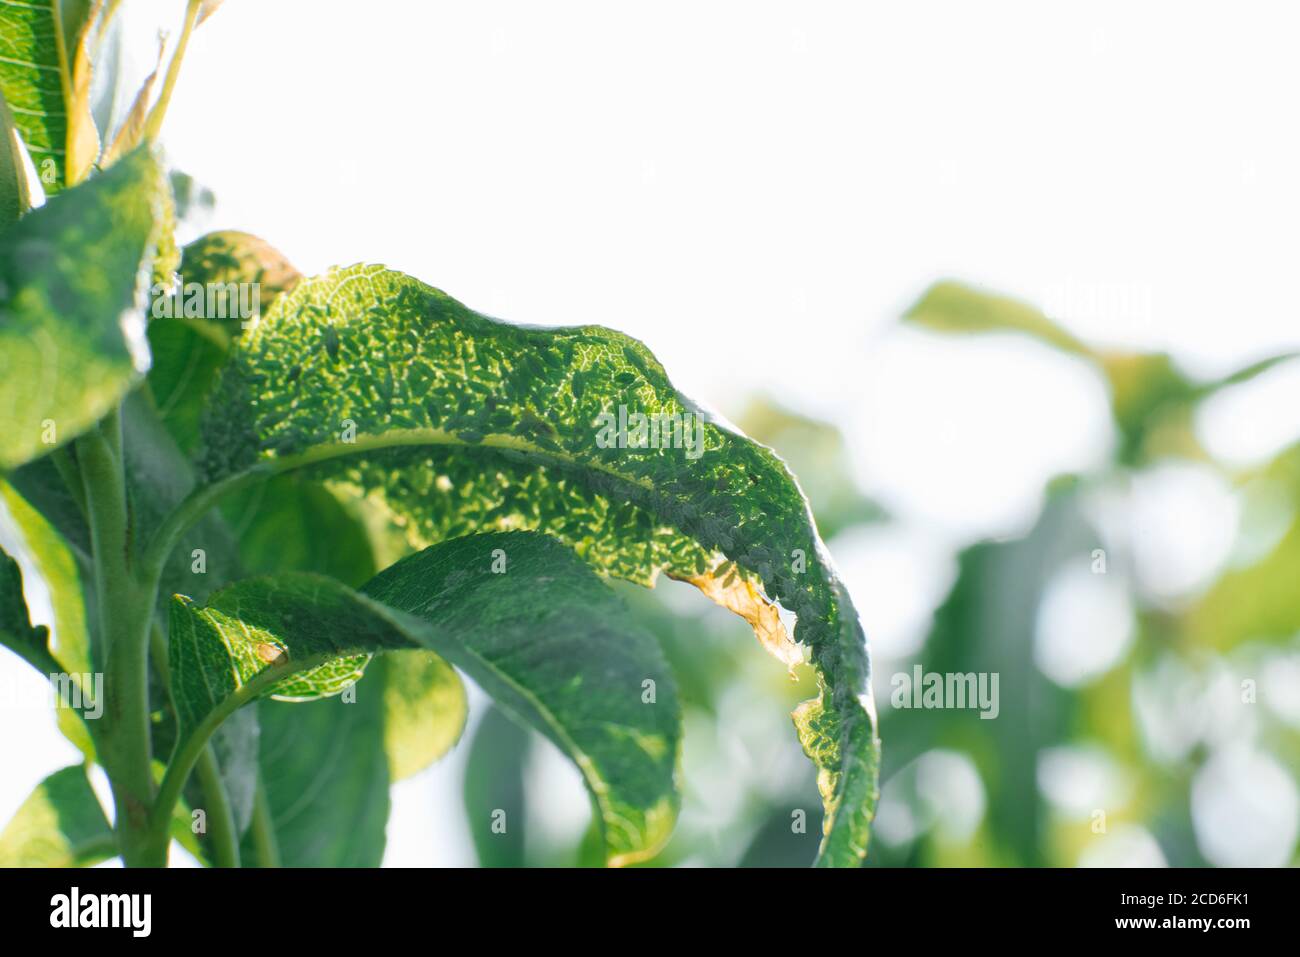 Aphid on an Apple tree branch, selective focus. Garden pests Stock Photo